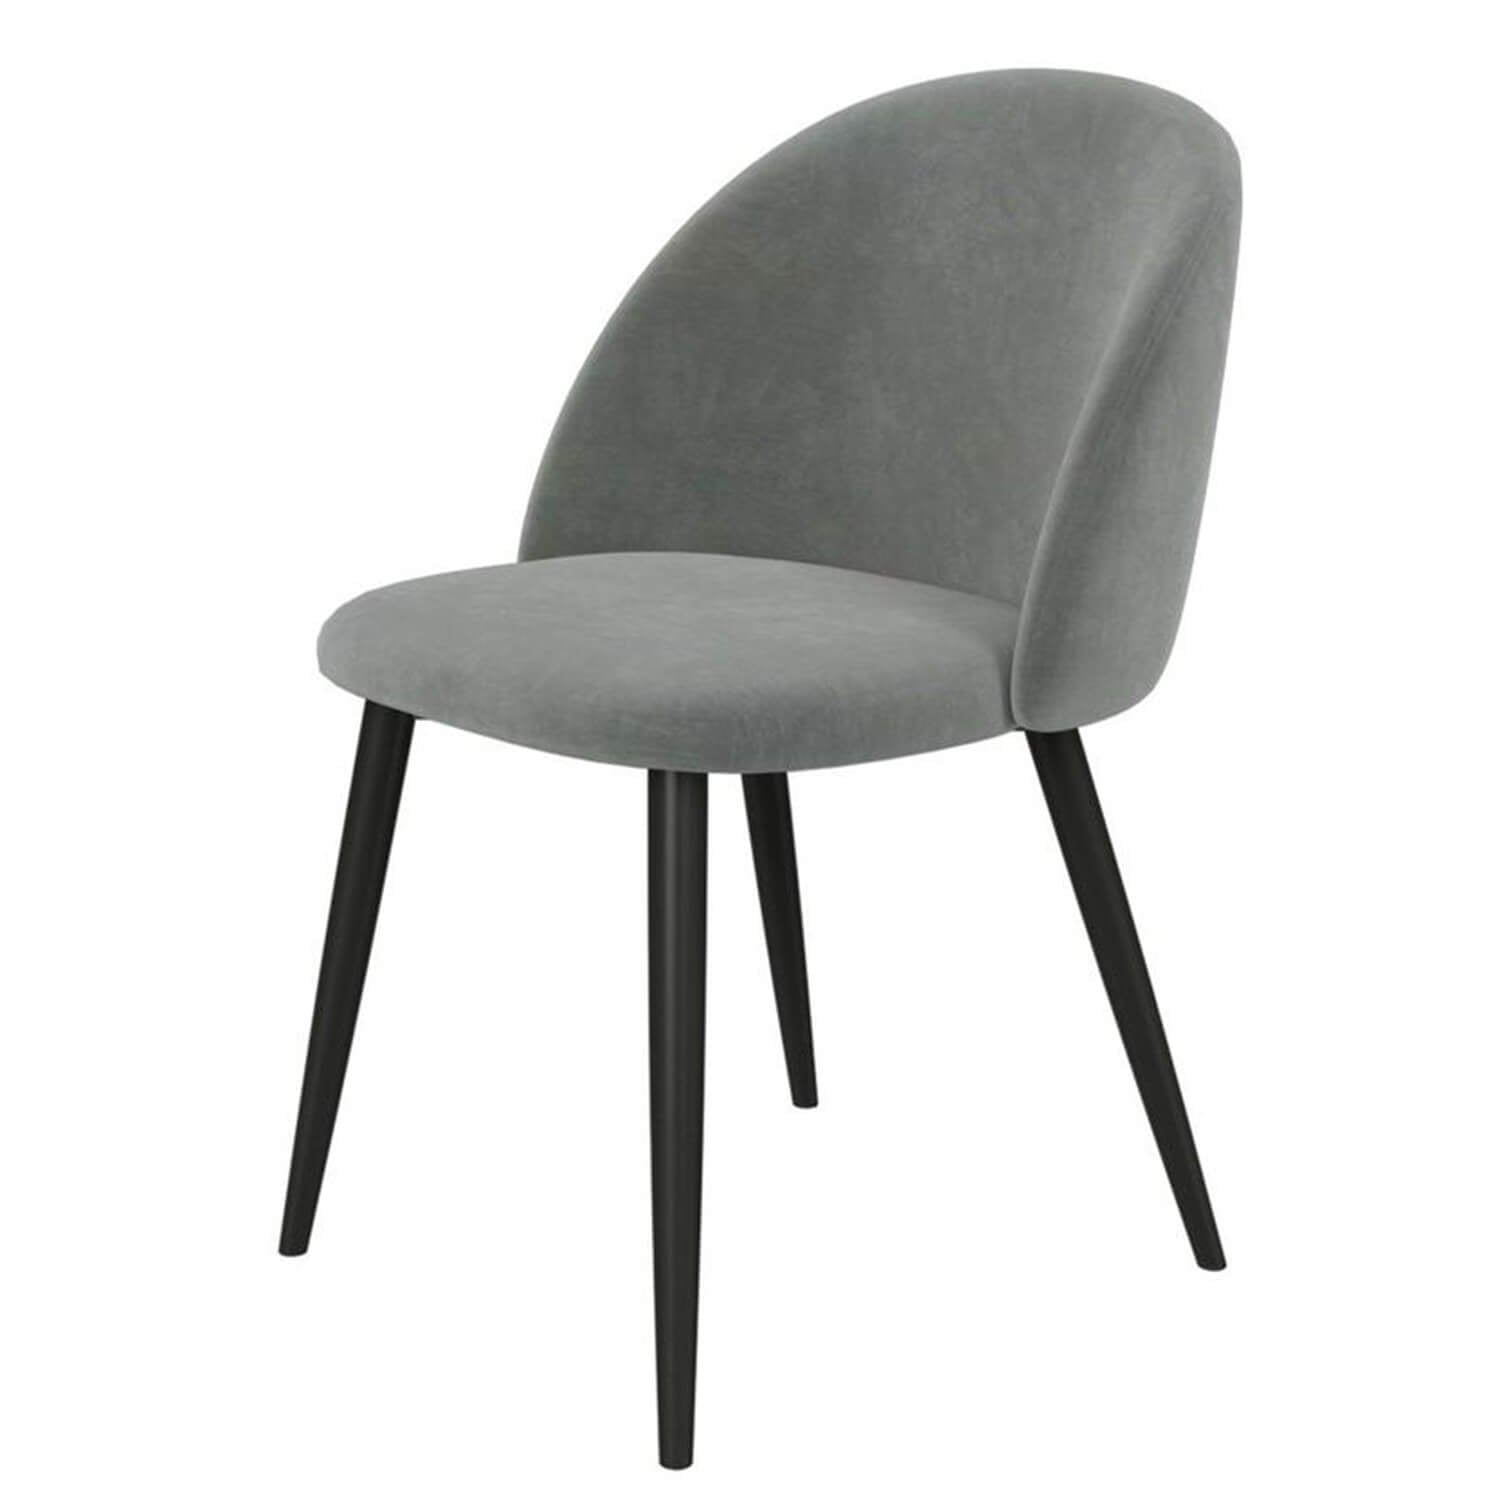 Bressio dining chair